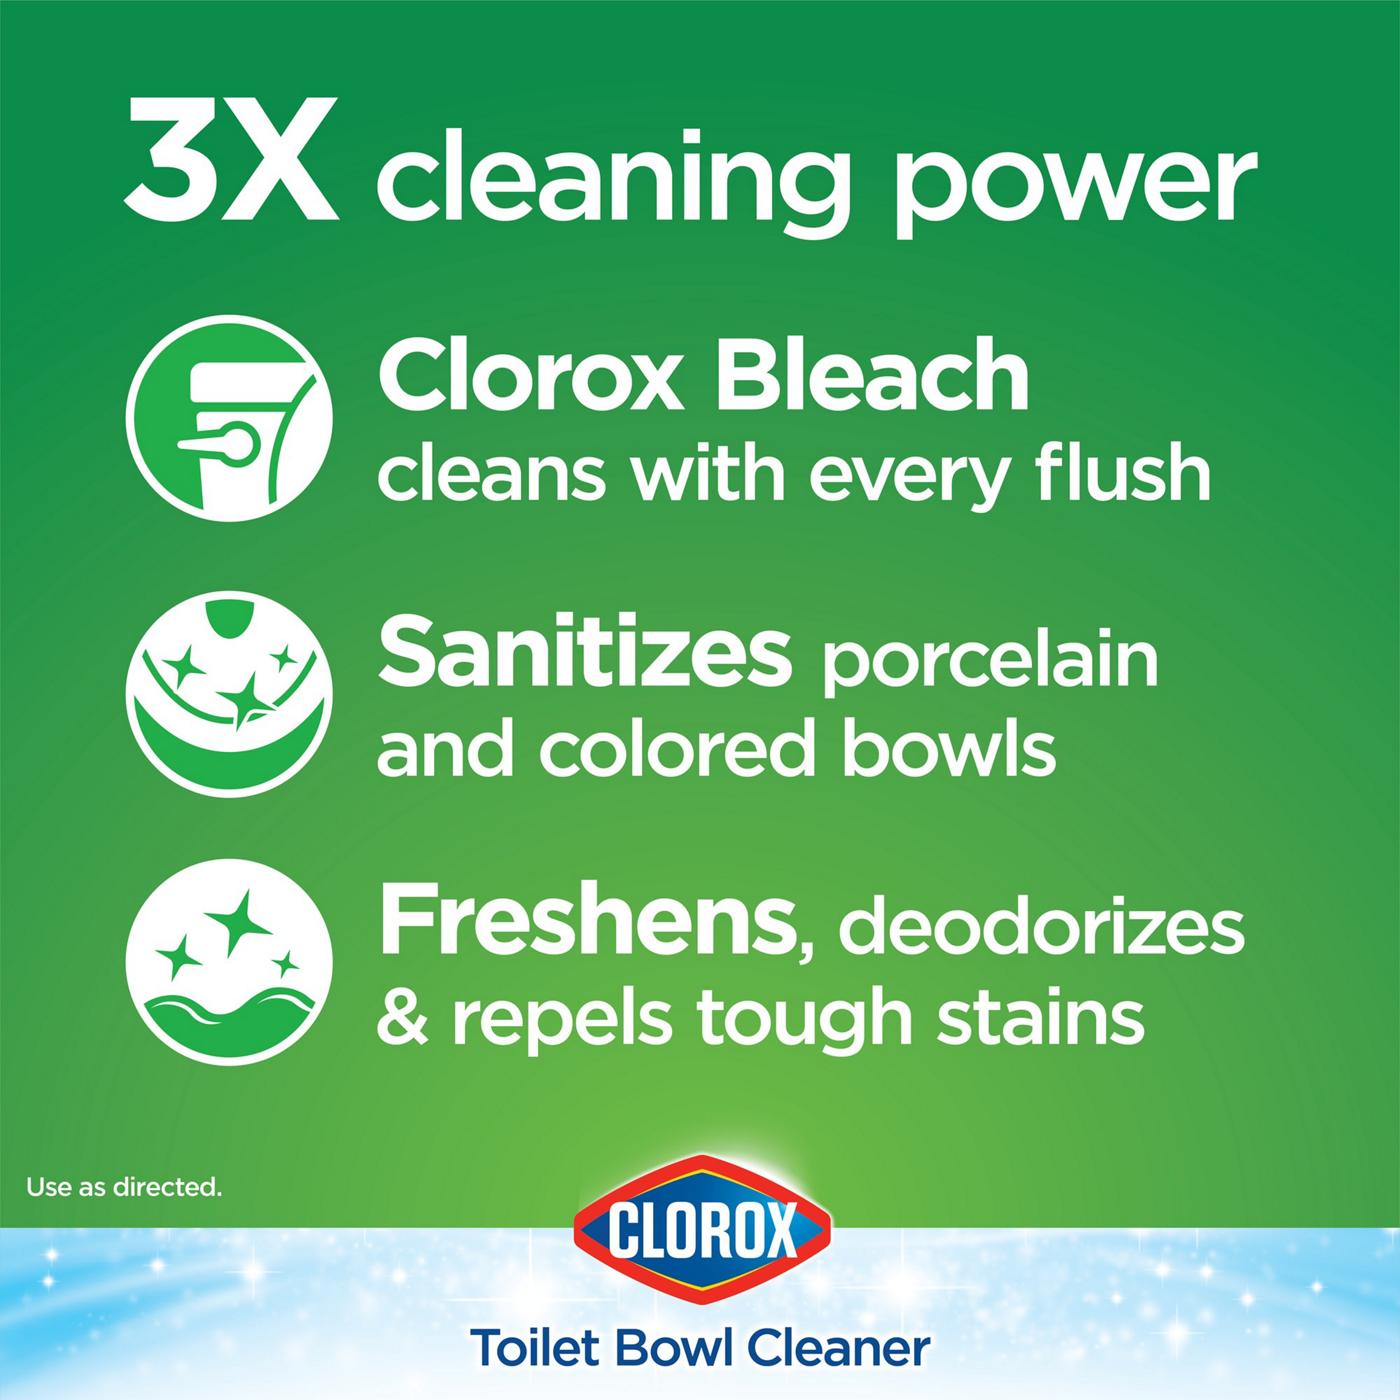 Clorox Bleach Ultra Clean Toilet Tablets; image 4 of 9